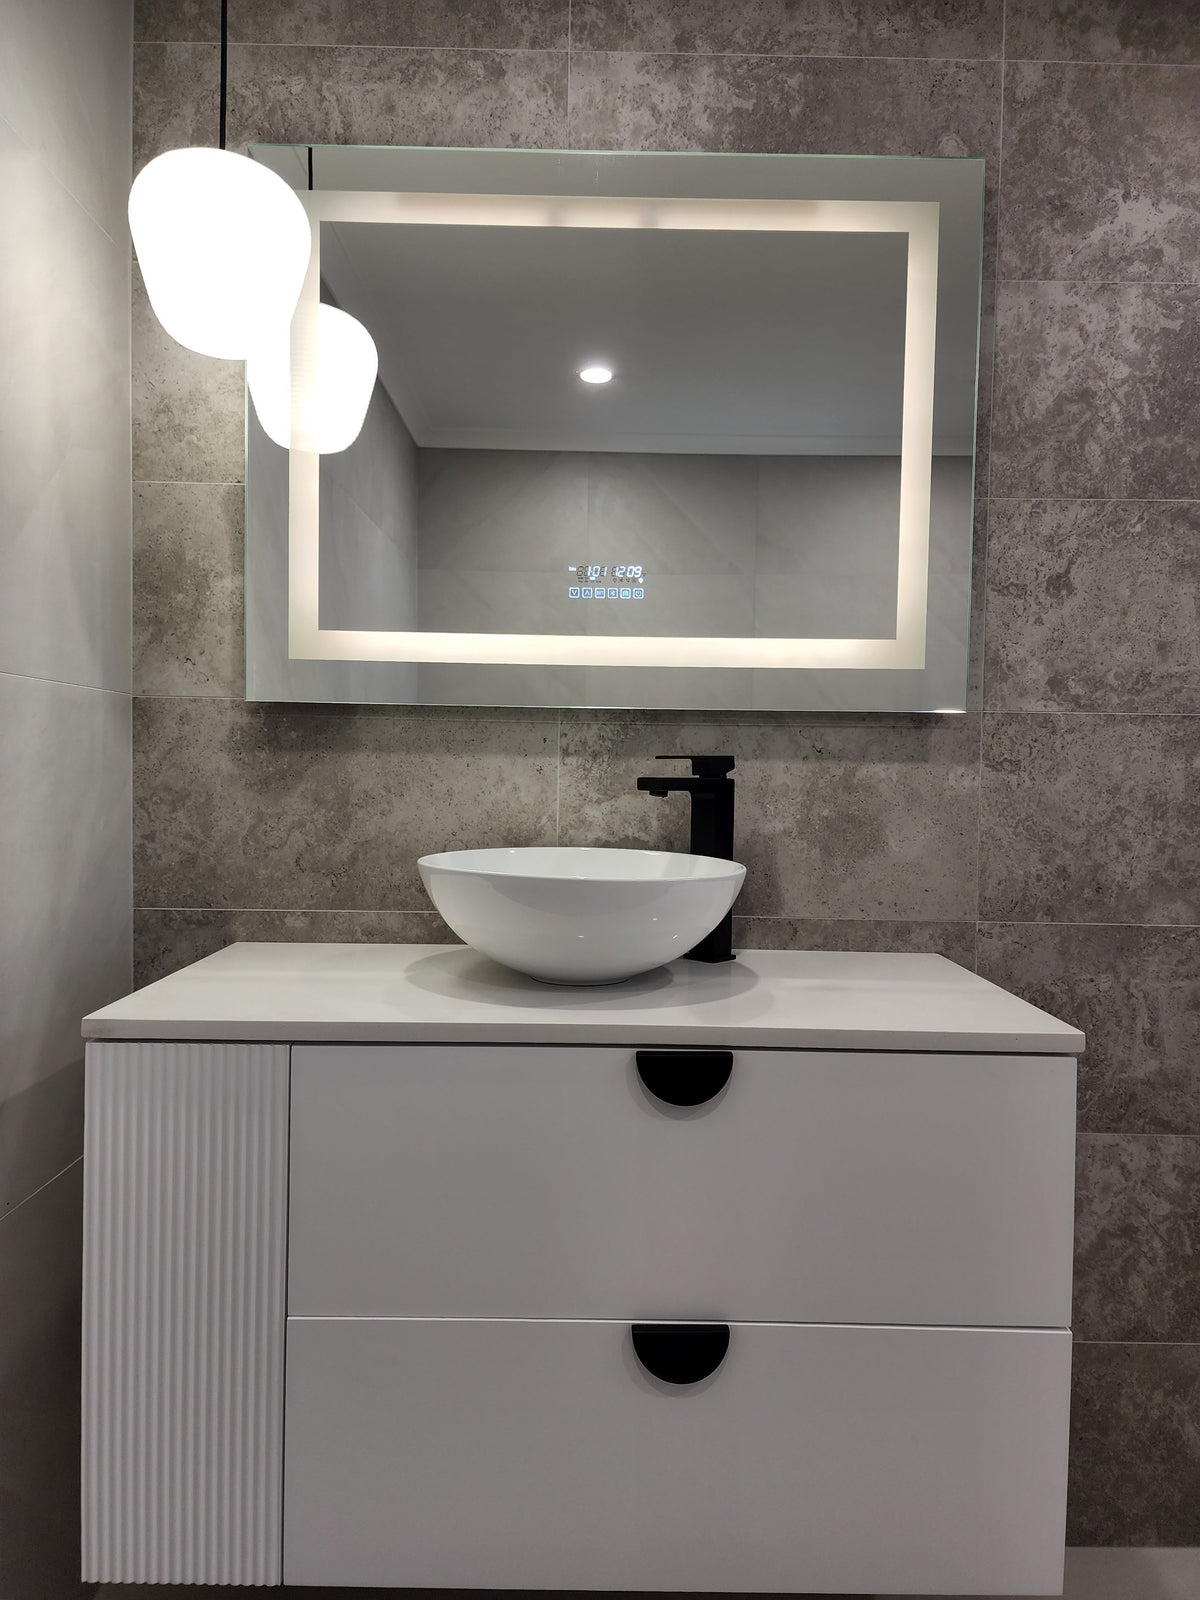 Frontal Shot of Vanity Area in Dirty Grey Bathroom with Front-Lighted LED Mirror, and Cabinet